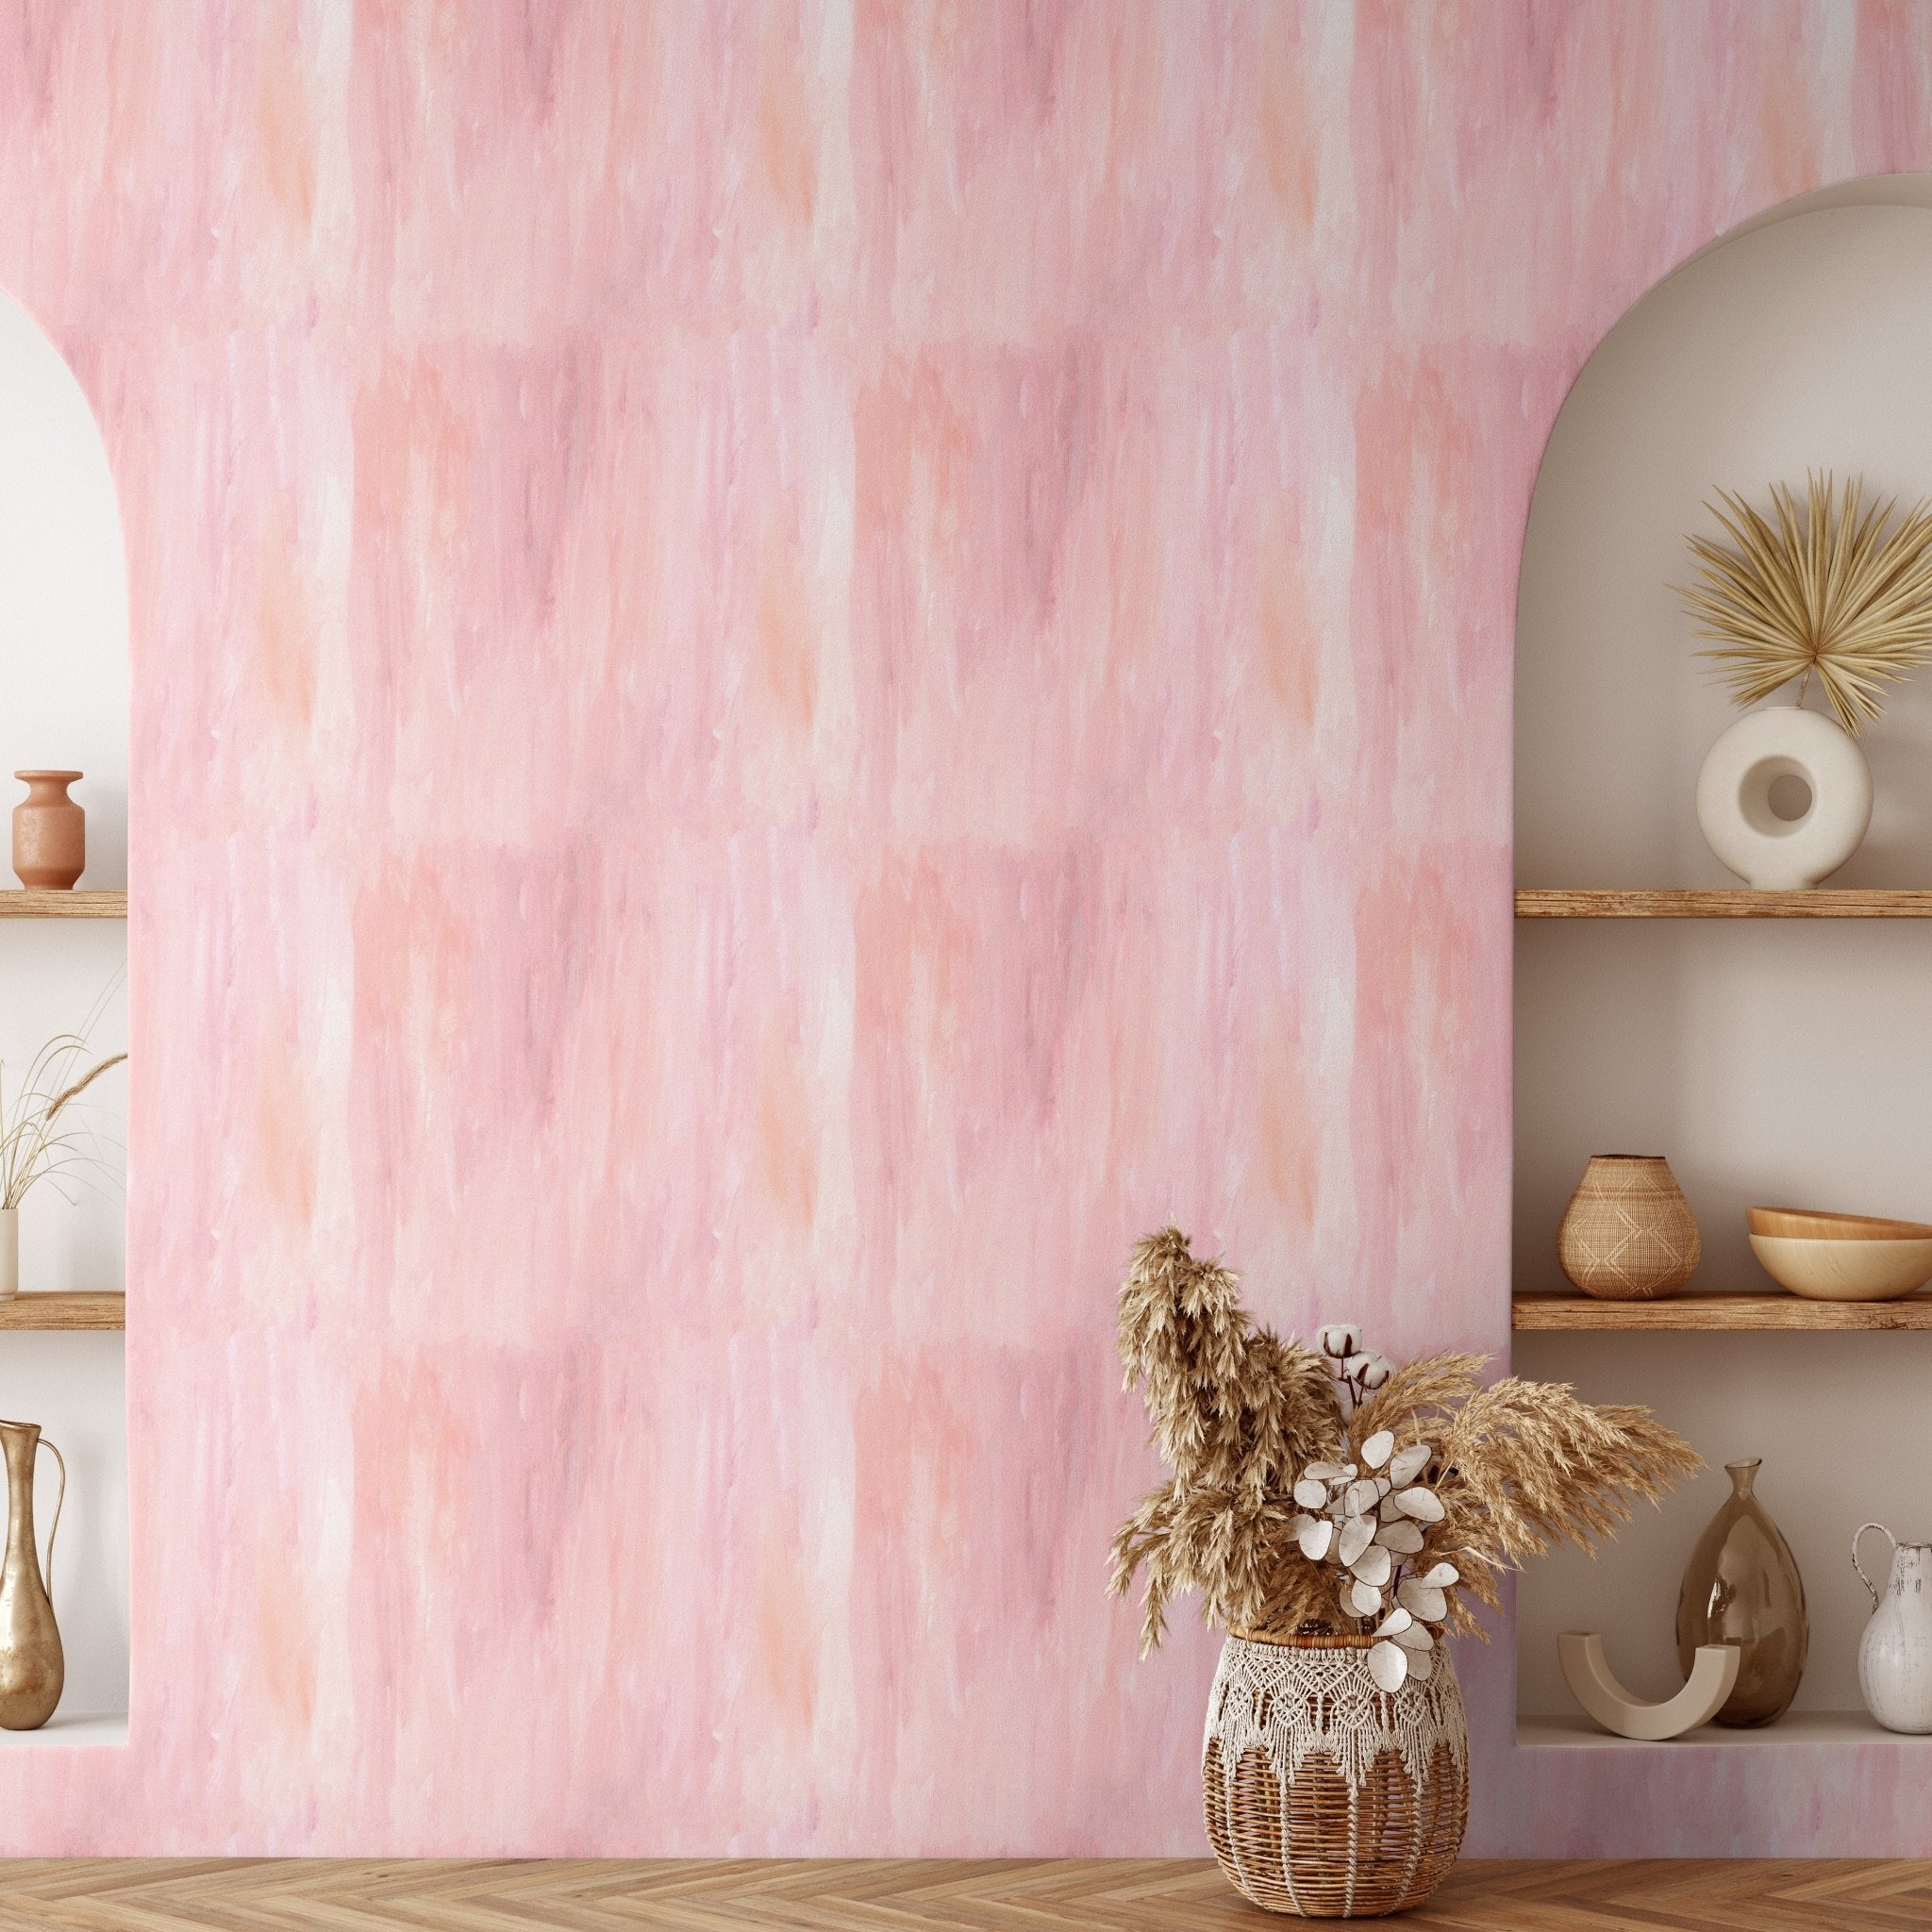 Textured Peel and Stick Wallpaper - Pink